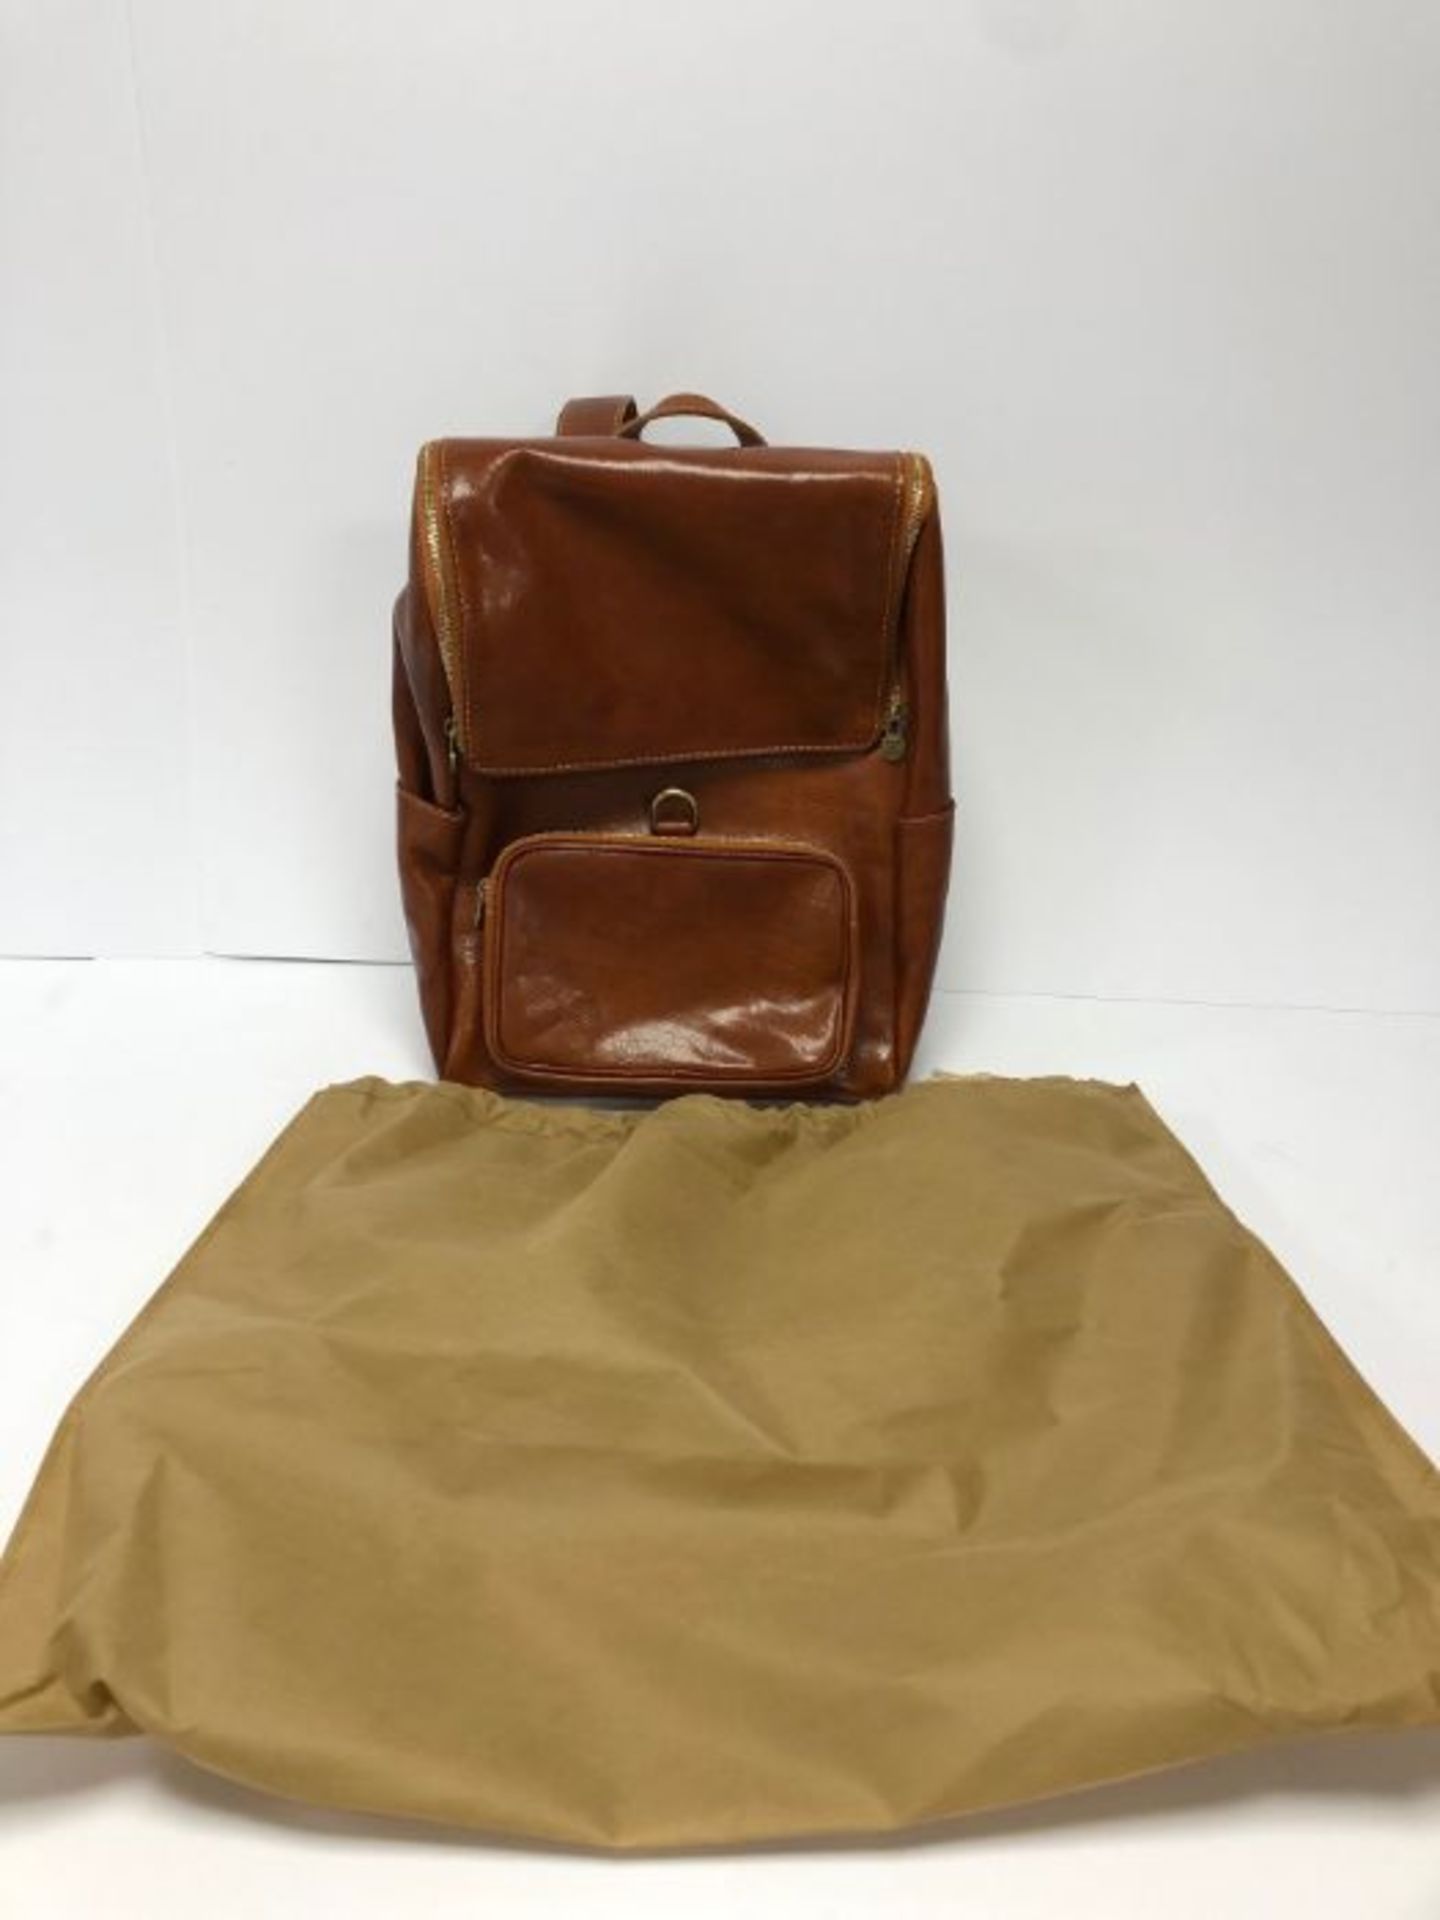 Vera Pelle Brown Leather Back Pack - Image 2 of 3